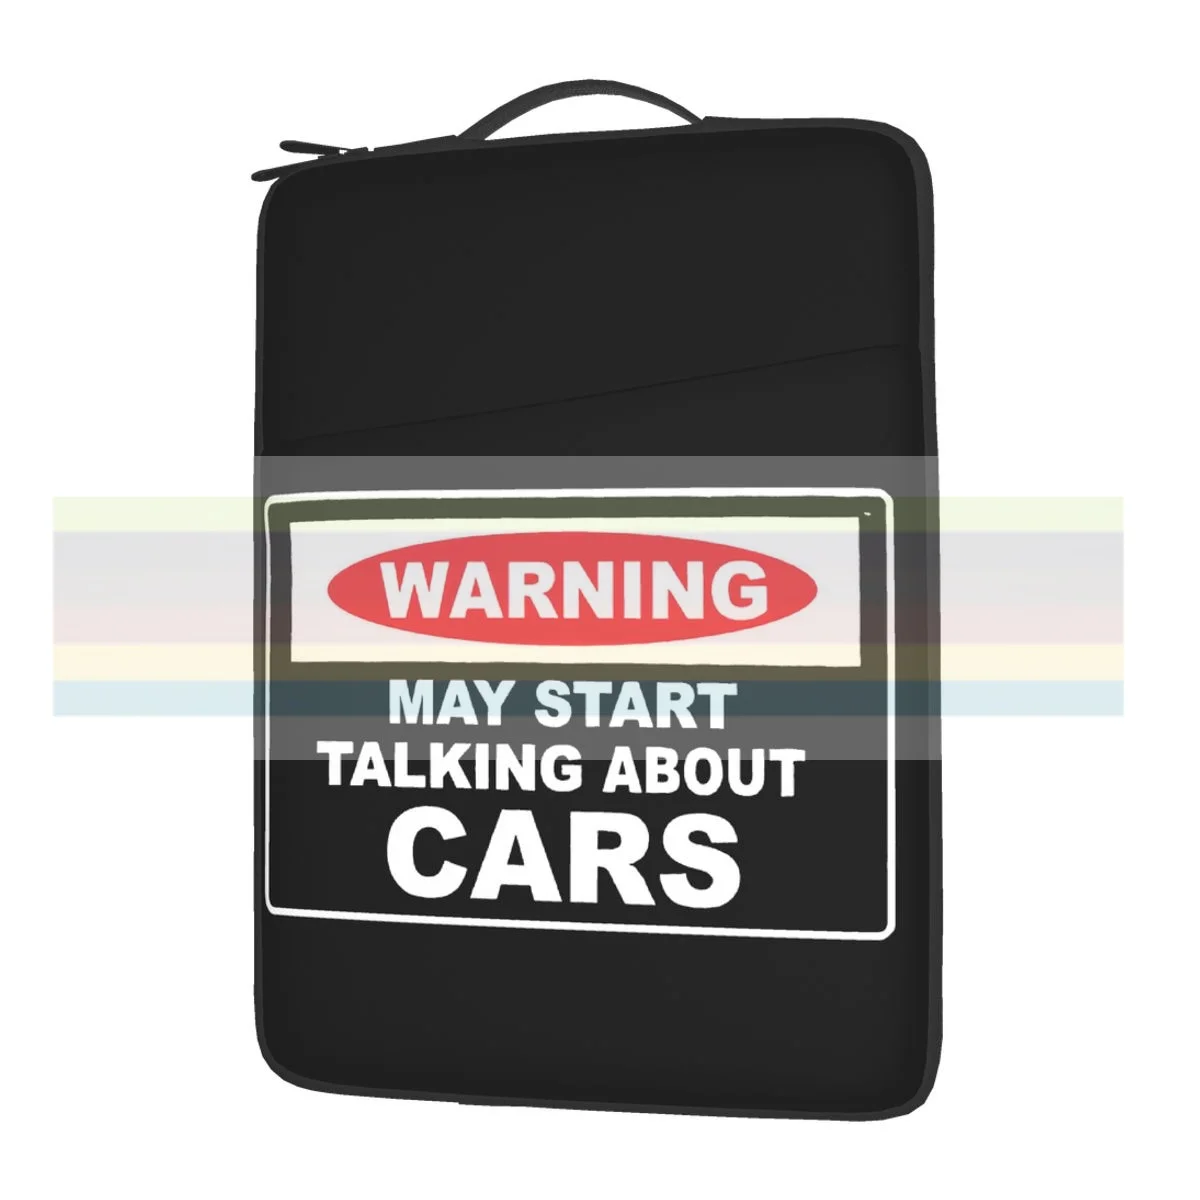 

WARNING MAY START TALKING ABOUT CARS - Waterproof laptop bag 13 14 15 inch. Laptop bag protective cover for briefcase.